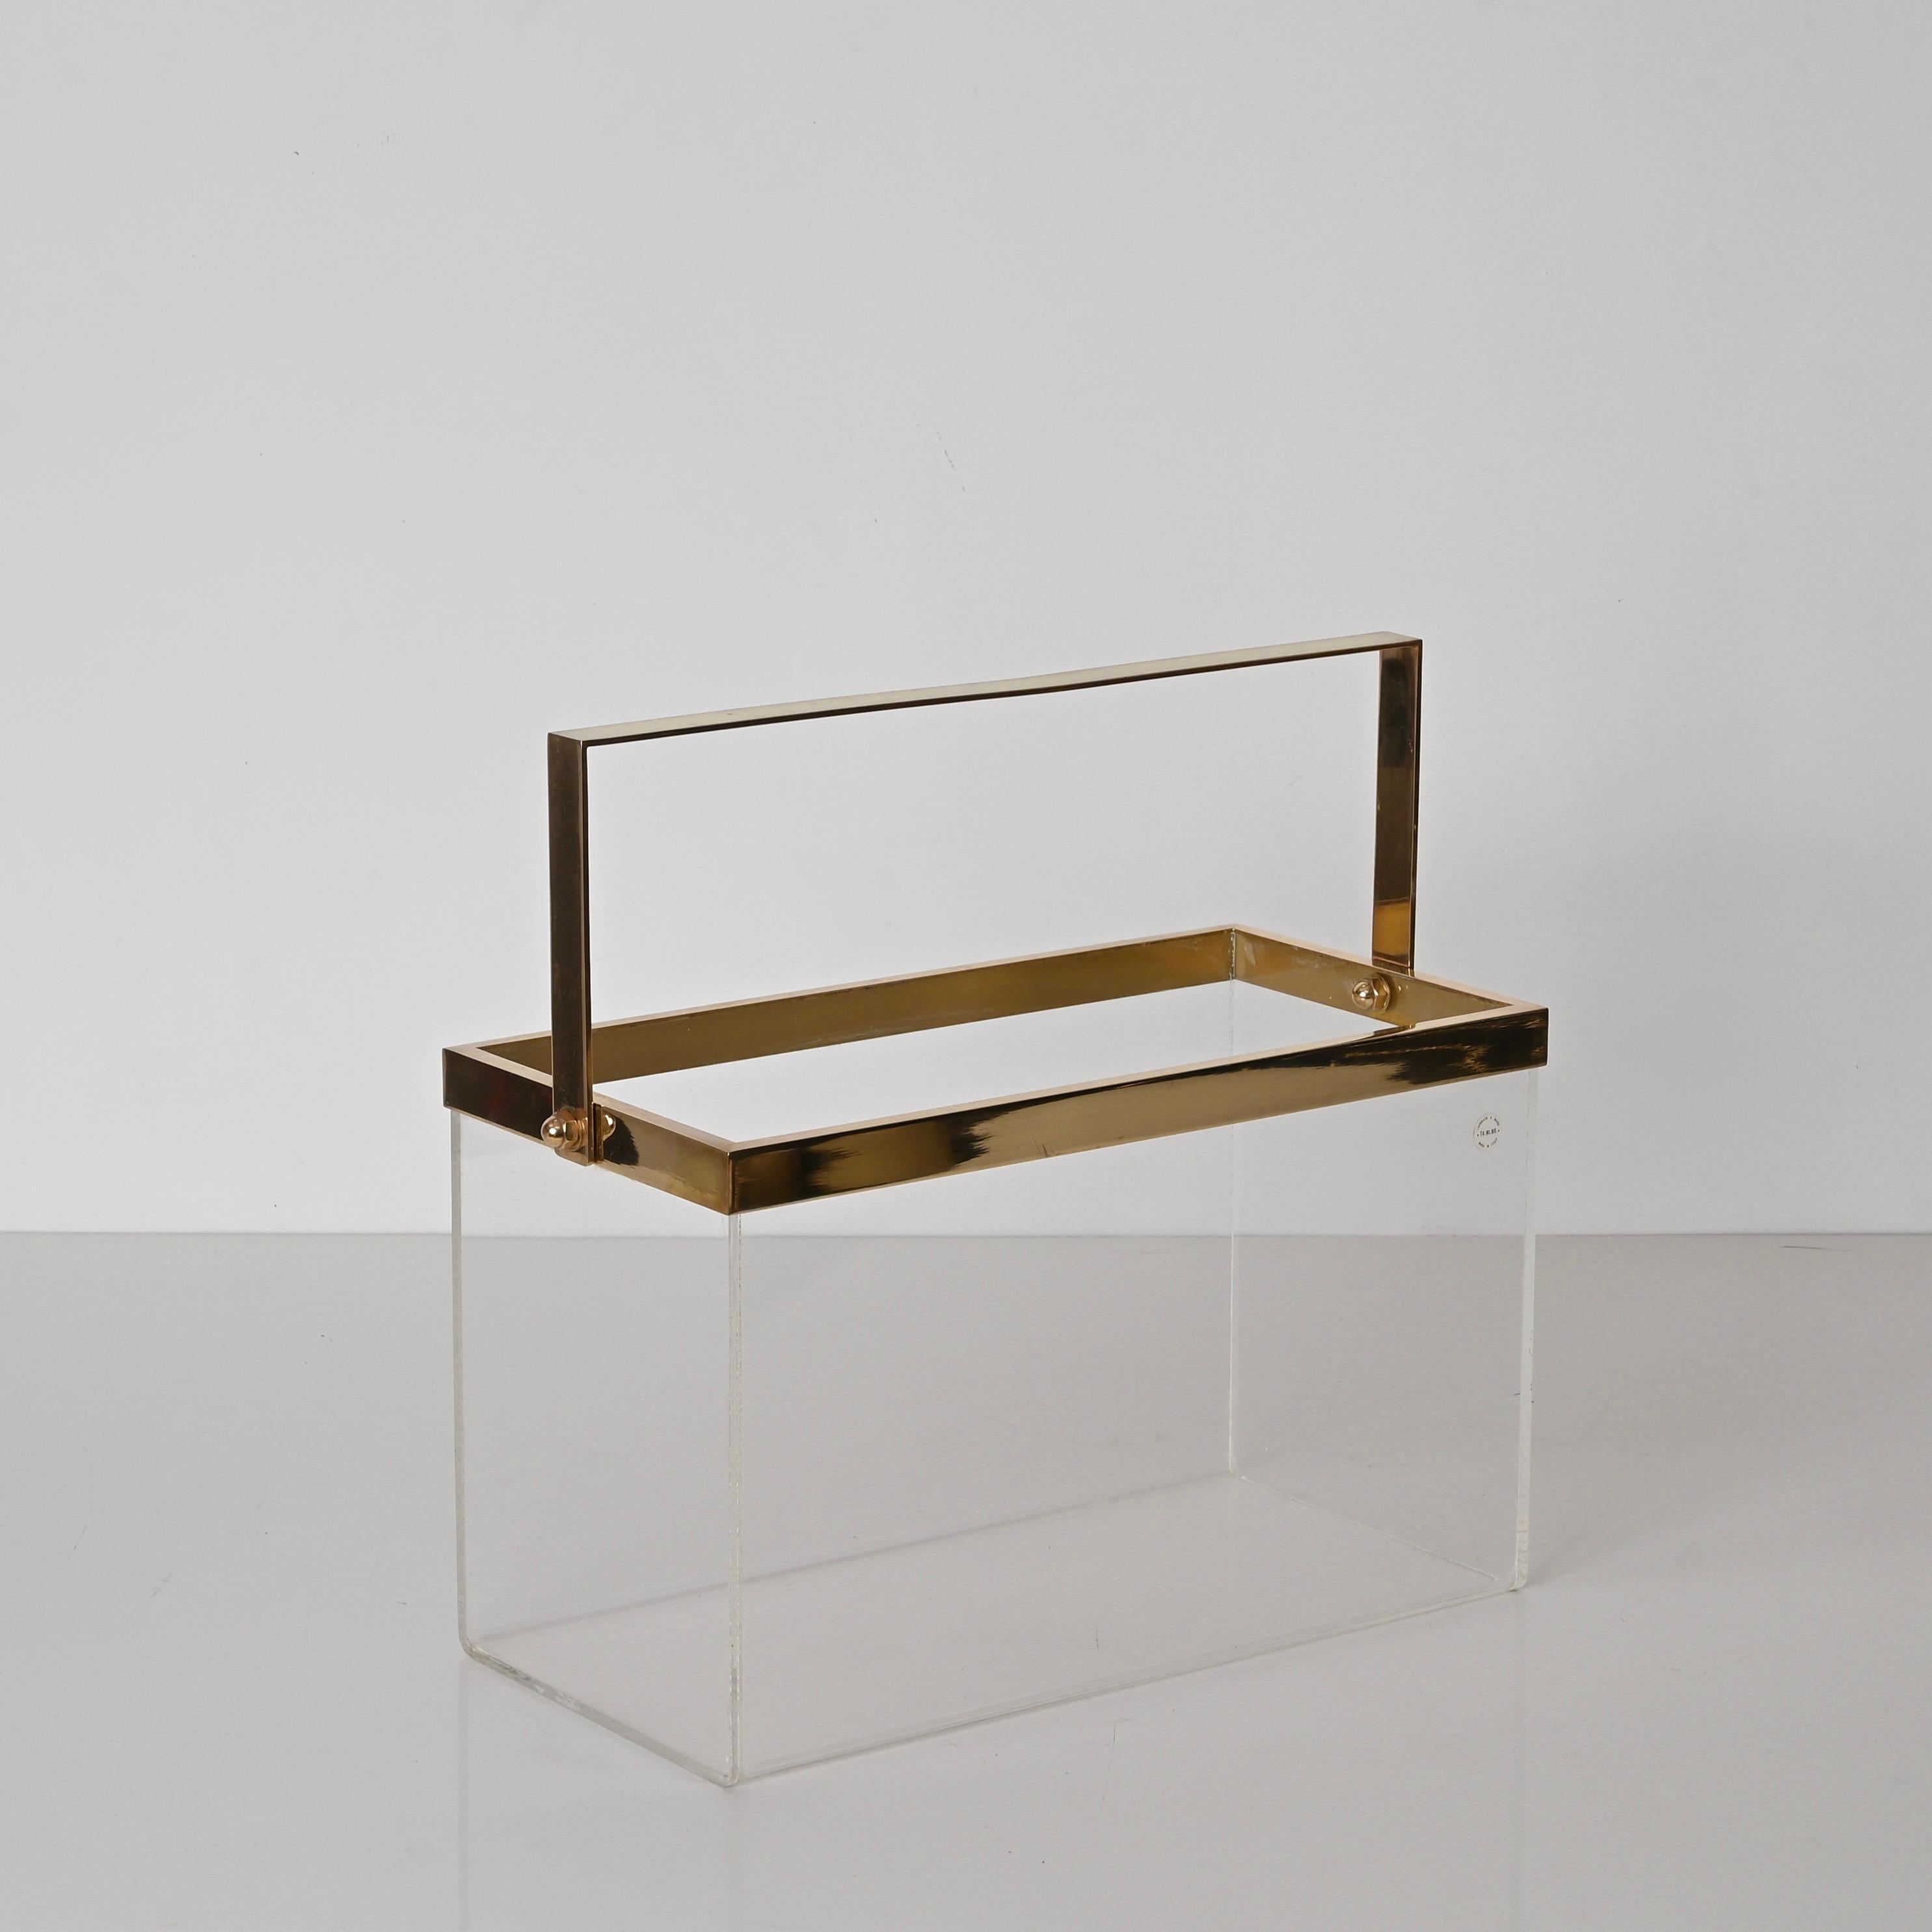 Hand-Crafted Magazine or Bottle Rack in Lucite and Brass, Italian Design 1970s, Romeo Rega For Sale